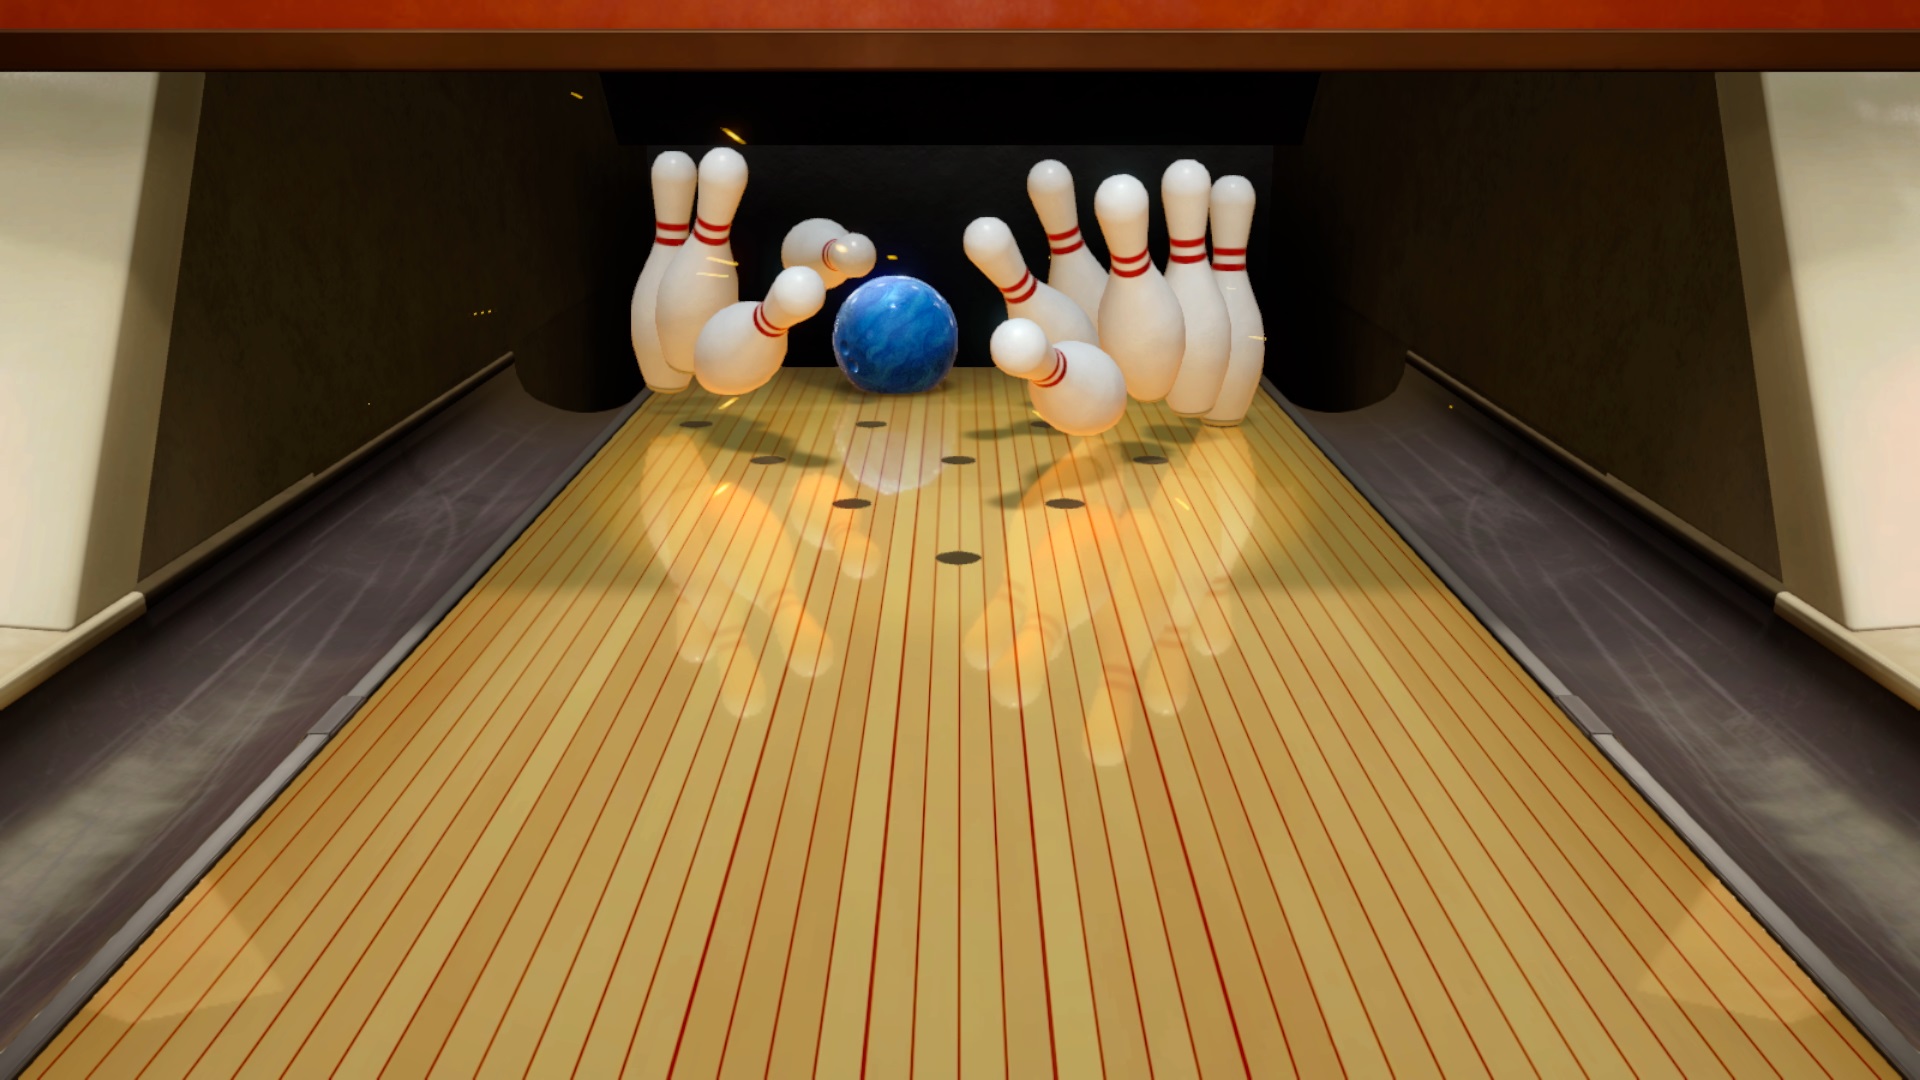 These new games (including a successor to 'Wii Sports' bowling) will keep you busy at home